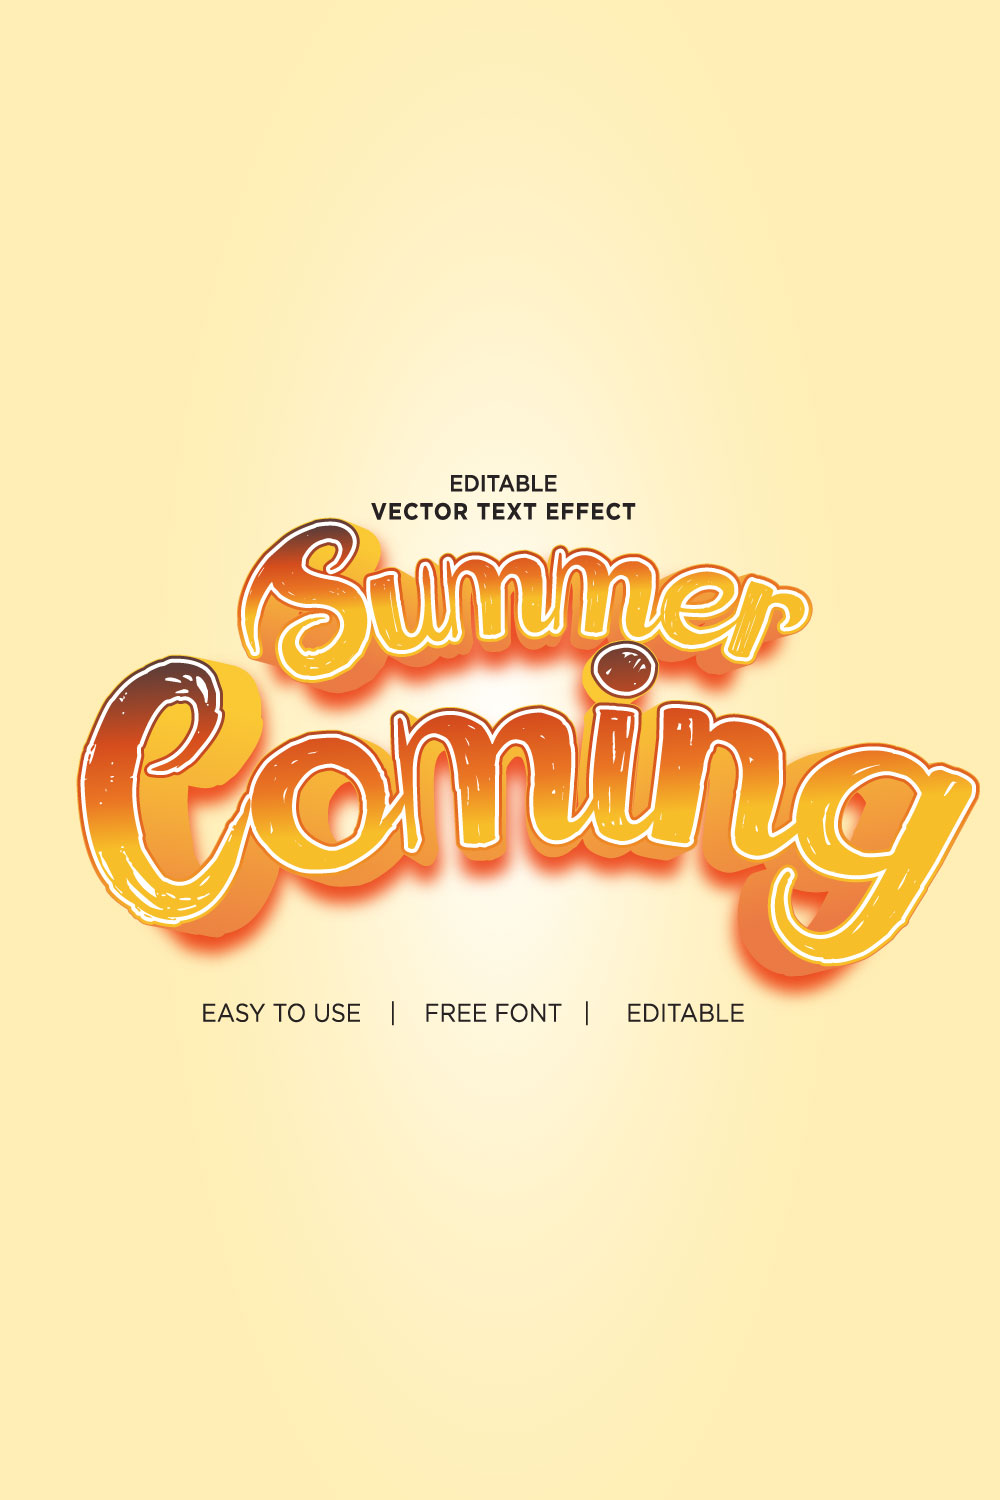 Summer 3d text effects vector illustrations New Text style eps files Editable text effect vector pinterest preview image.